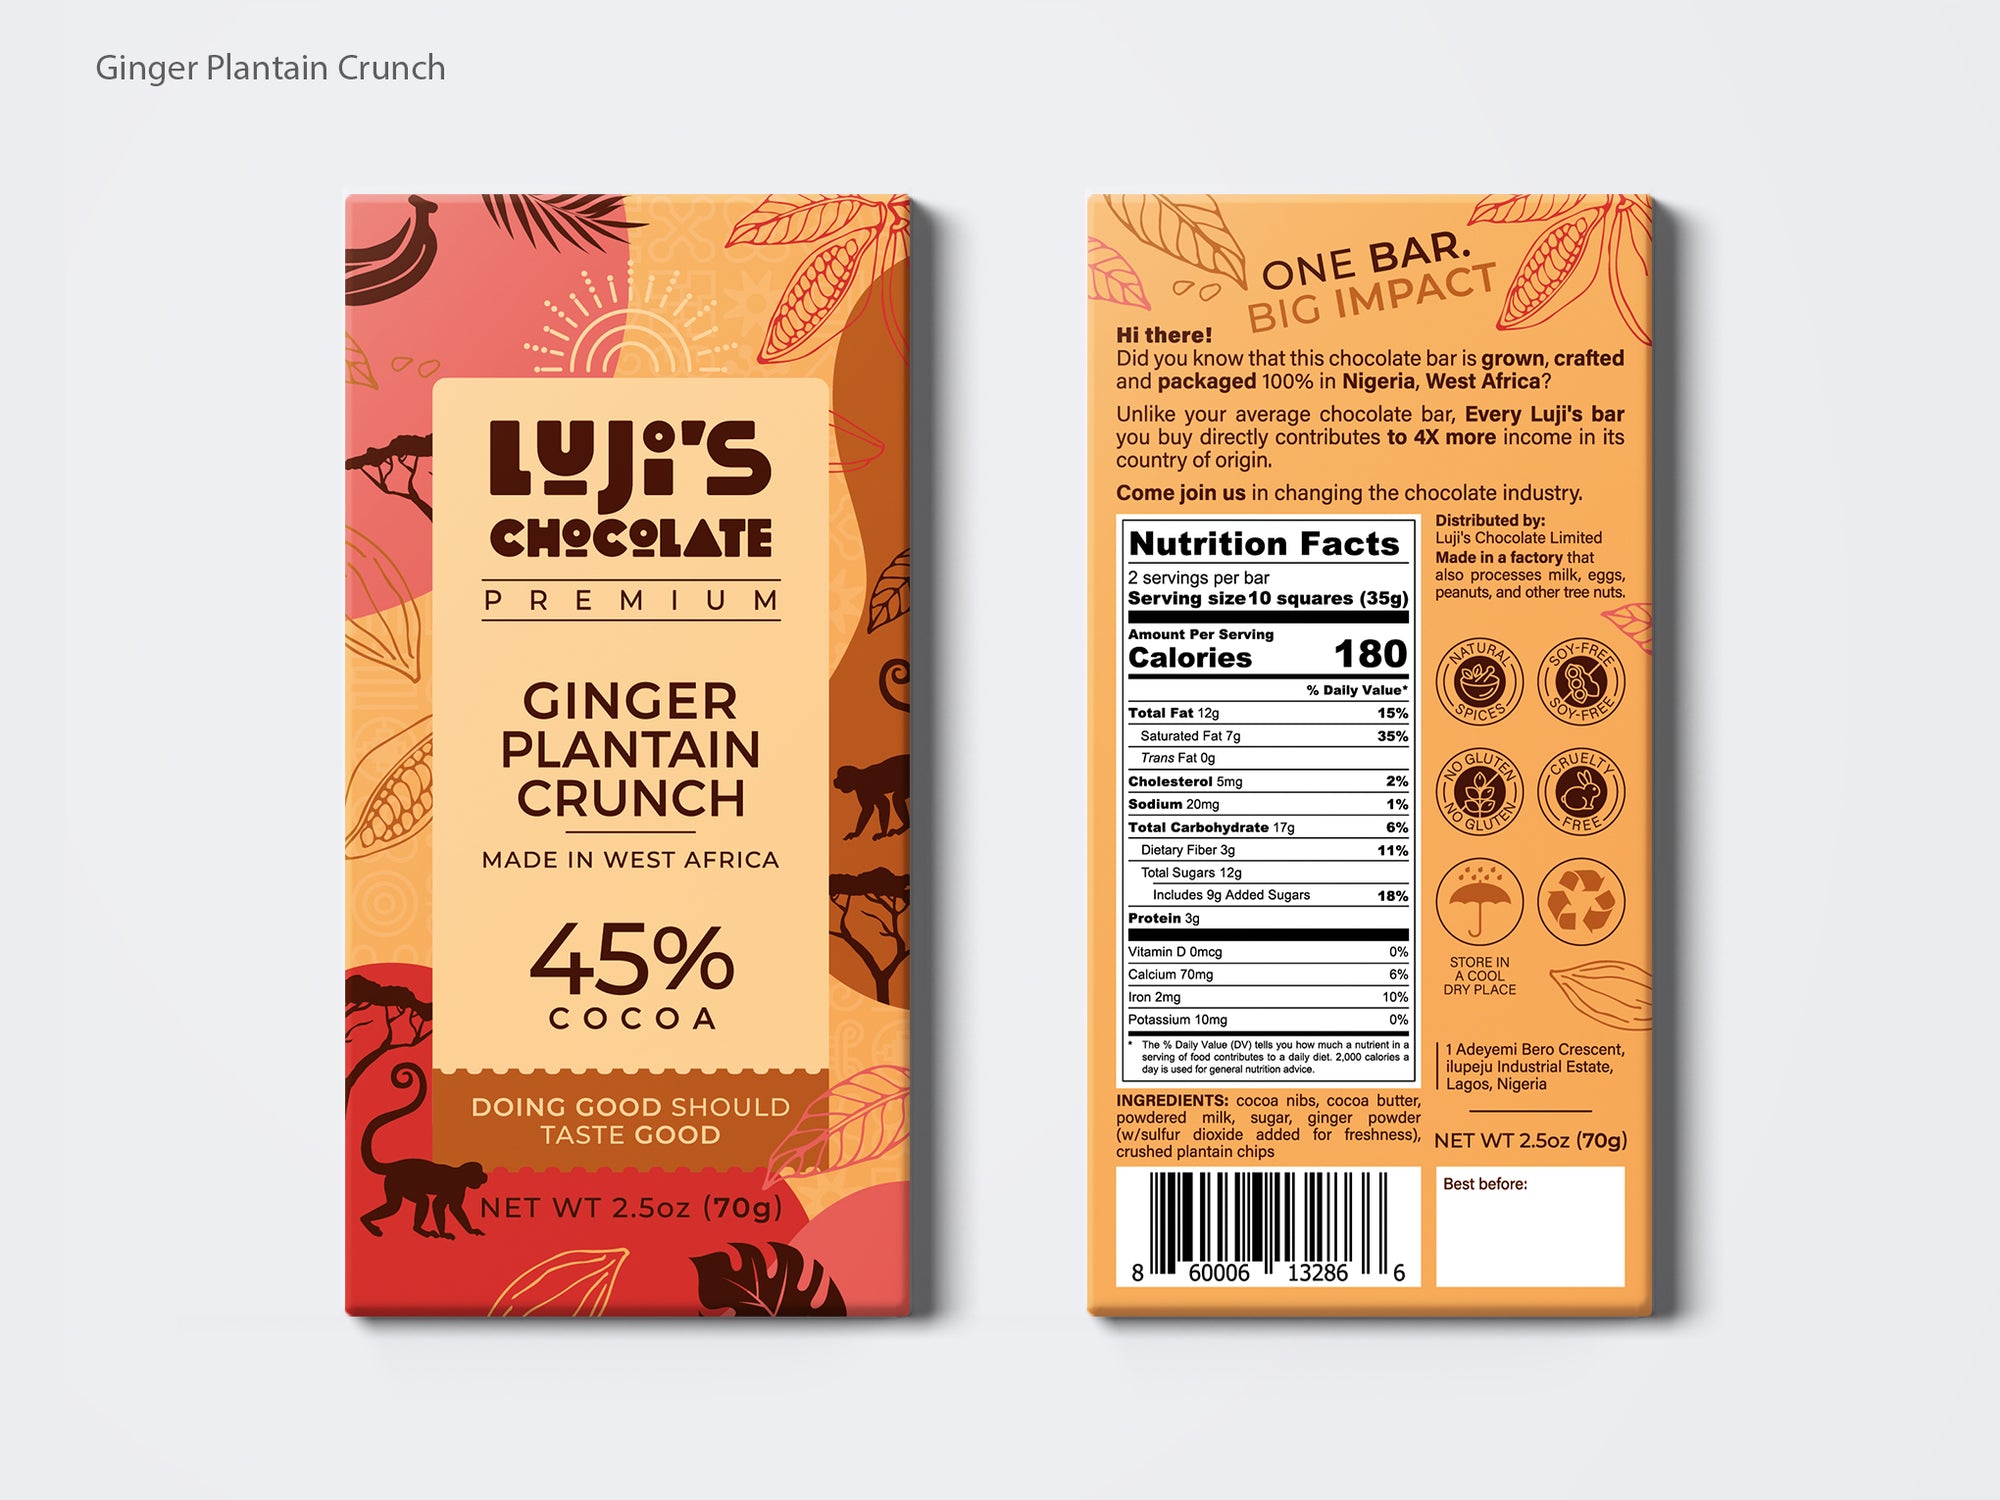 Luji's Chocolate Ginger Plantain Crunch Chocolate bar packaging, with warm red and orange tones, adorned with monkey and leaf graphics, showcases '45% Cocoa' and the brand slogan on the front, with nutritional information, ingredients and manufacturing details on the reverse side.